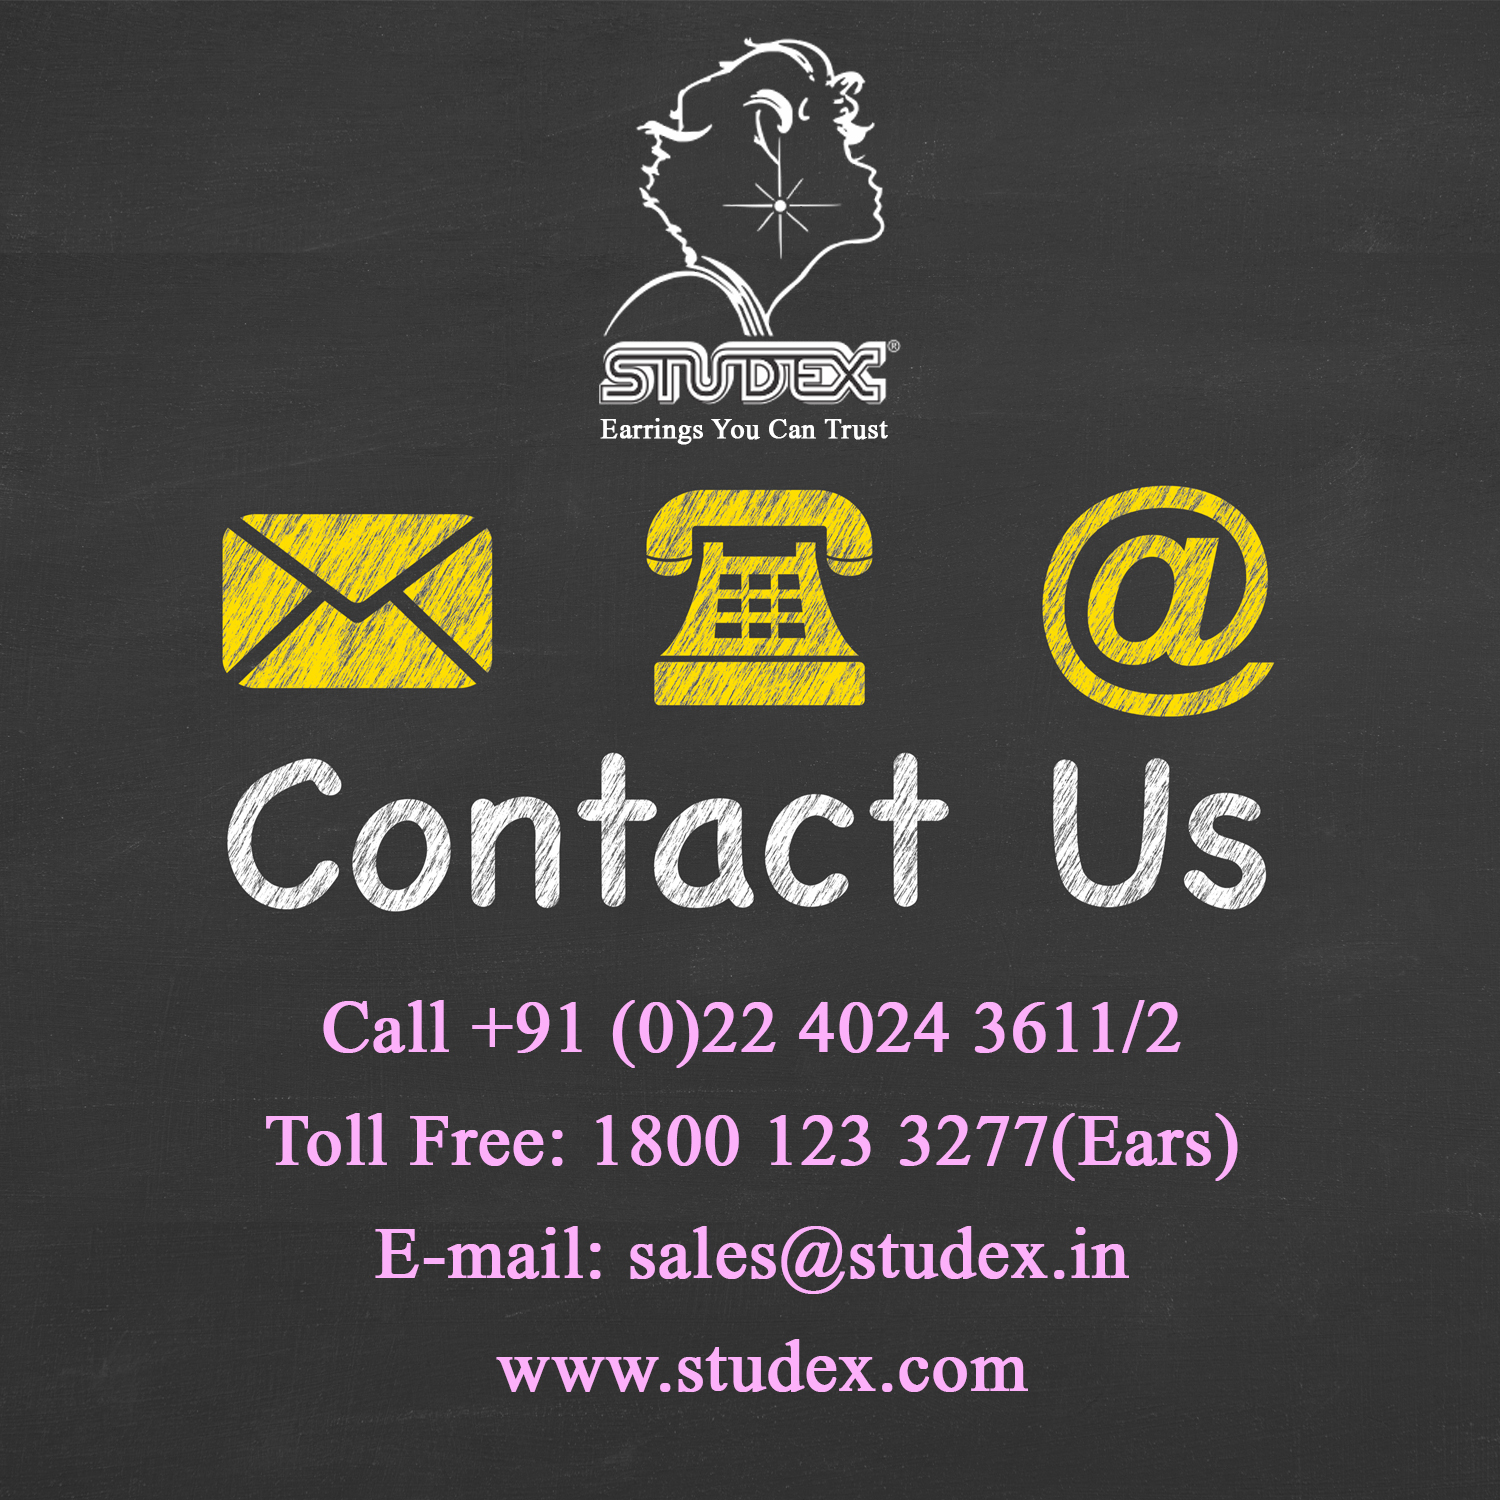 Contact us for your orders , for feedback or suggestions through Toll free: 18001233277, 022 40243611/2 or mail us @ sales@studex.in. and log on to www.studex.com for more information. Like us on our social media pages @ Facebook • twitter • pintrest • LinkedIn • wordpress